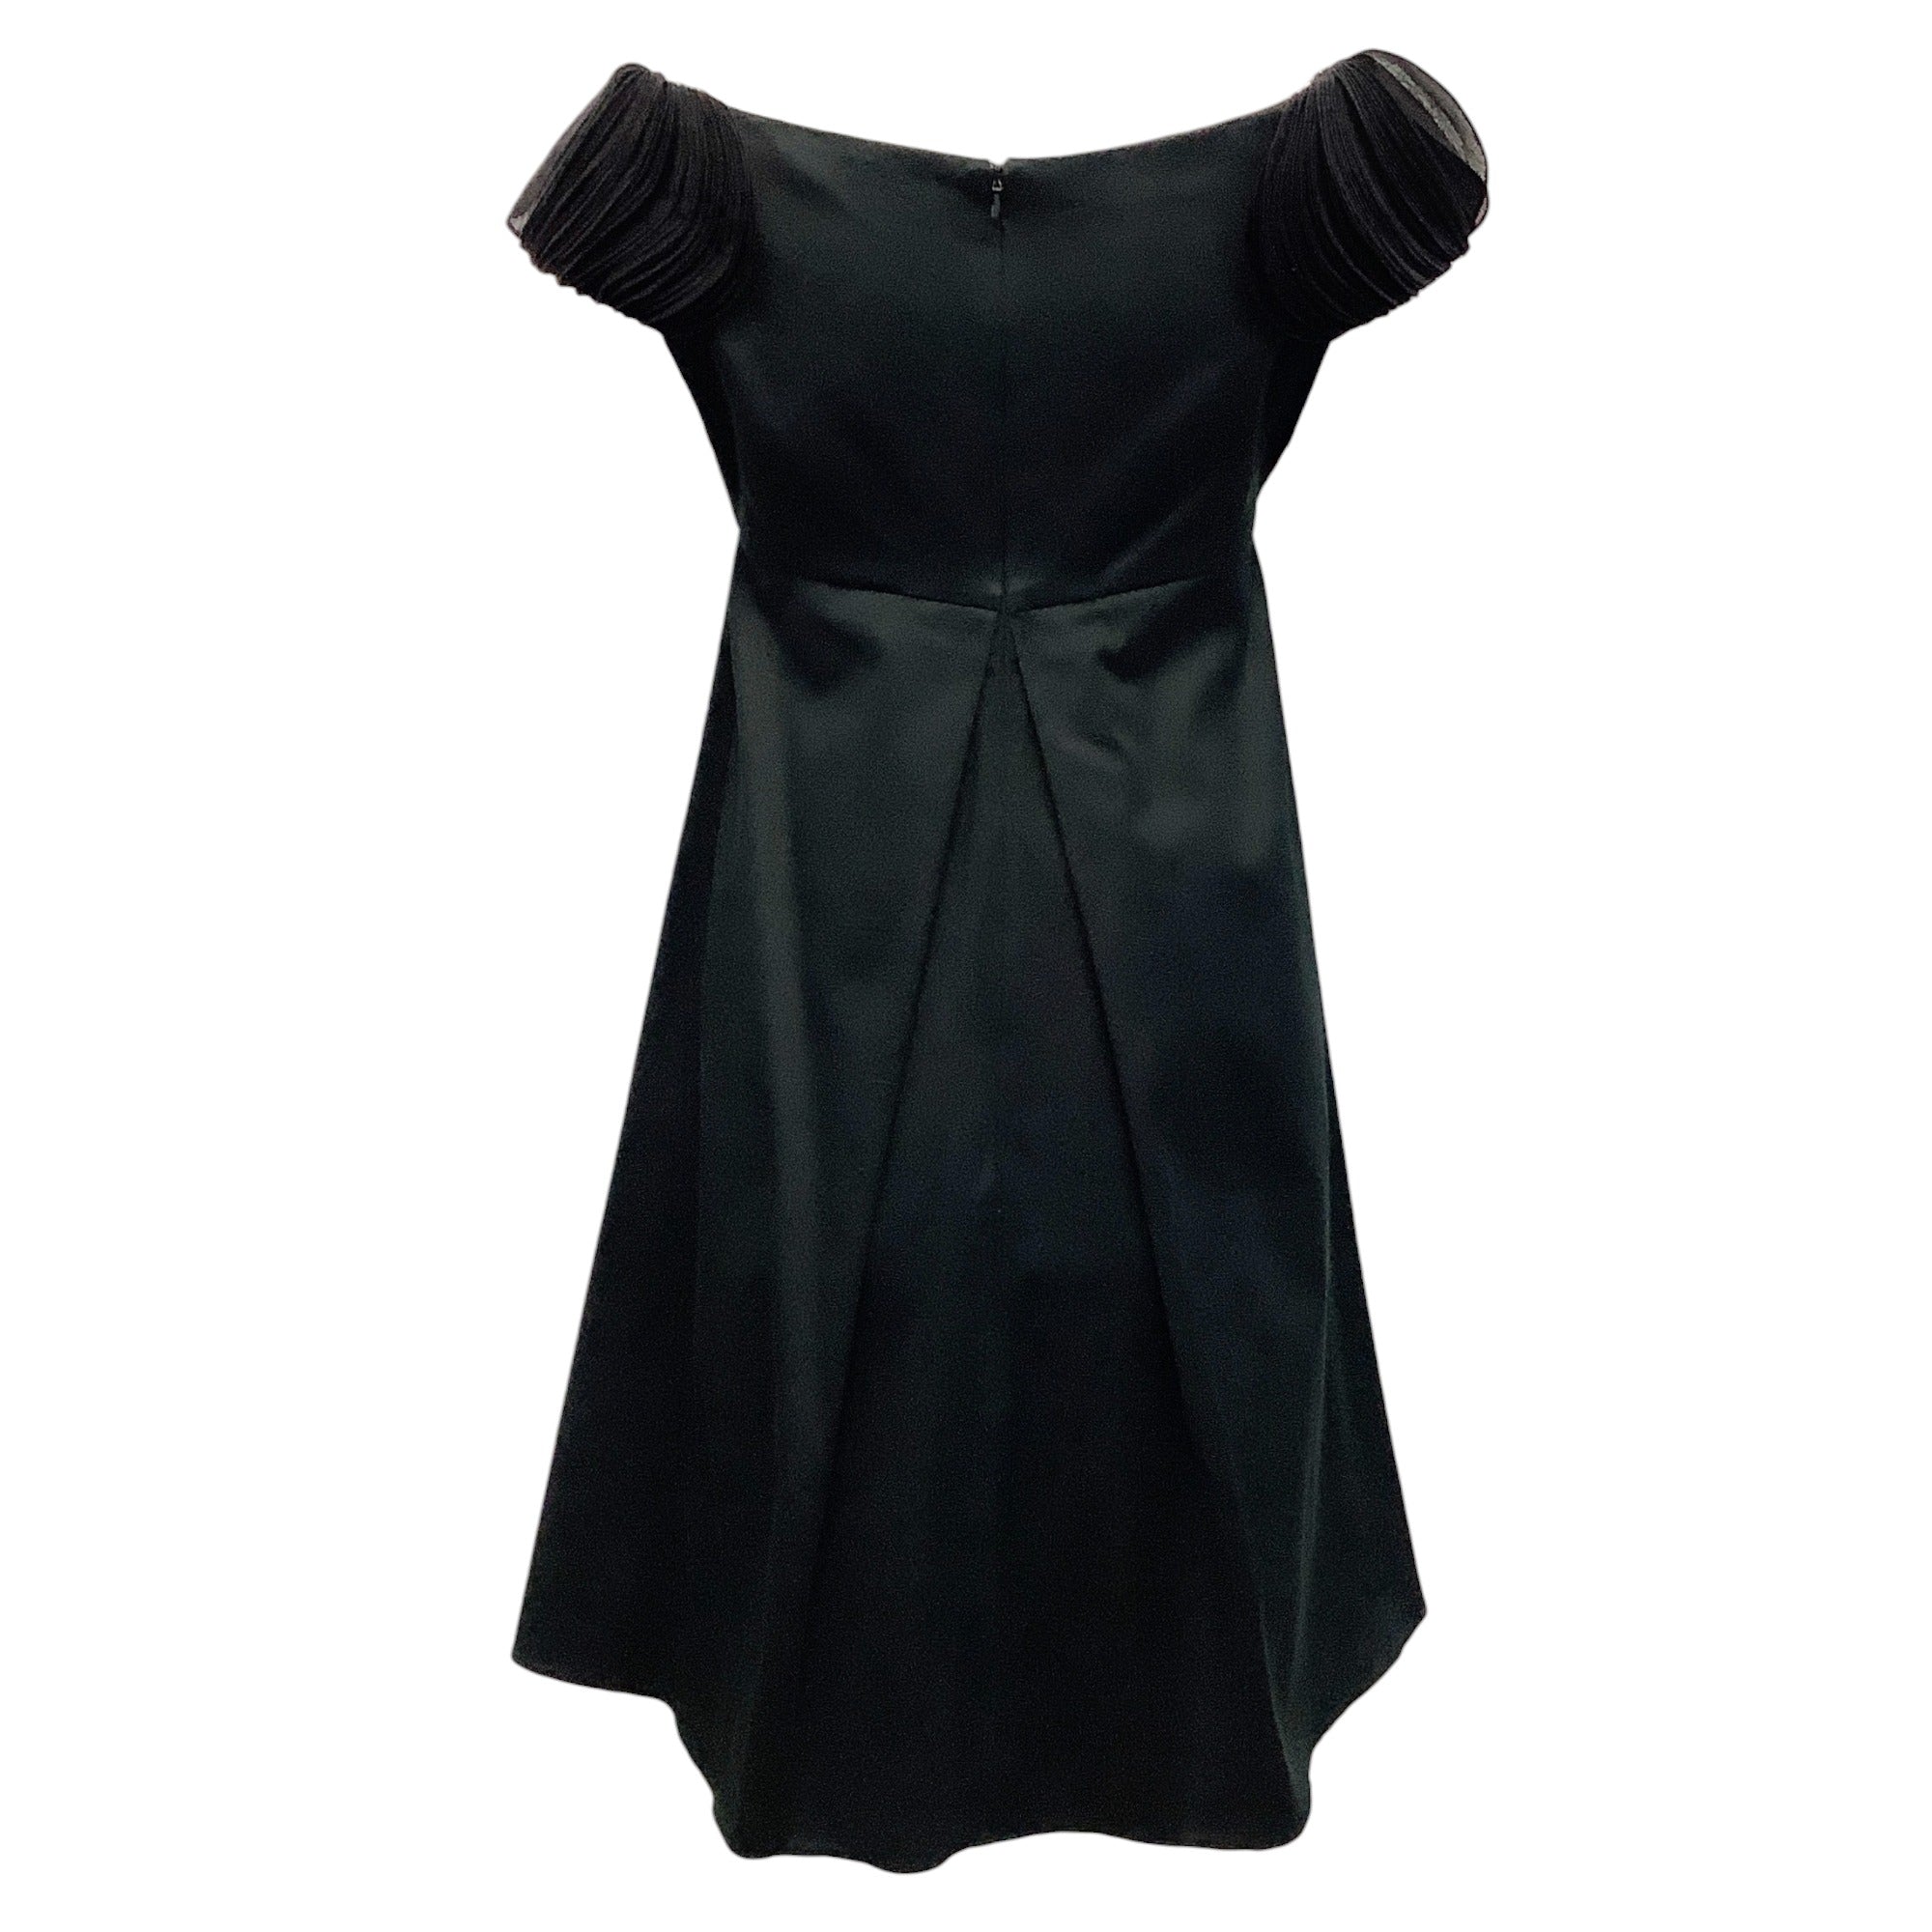 Valentino Black Cotton Dress with Petal Embellished Sleeves